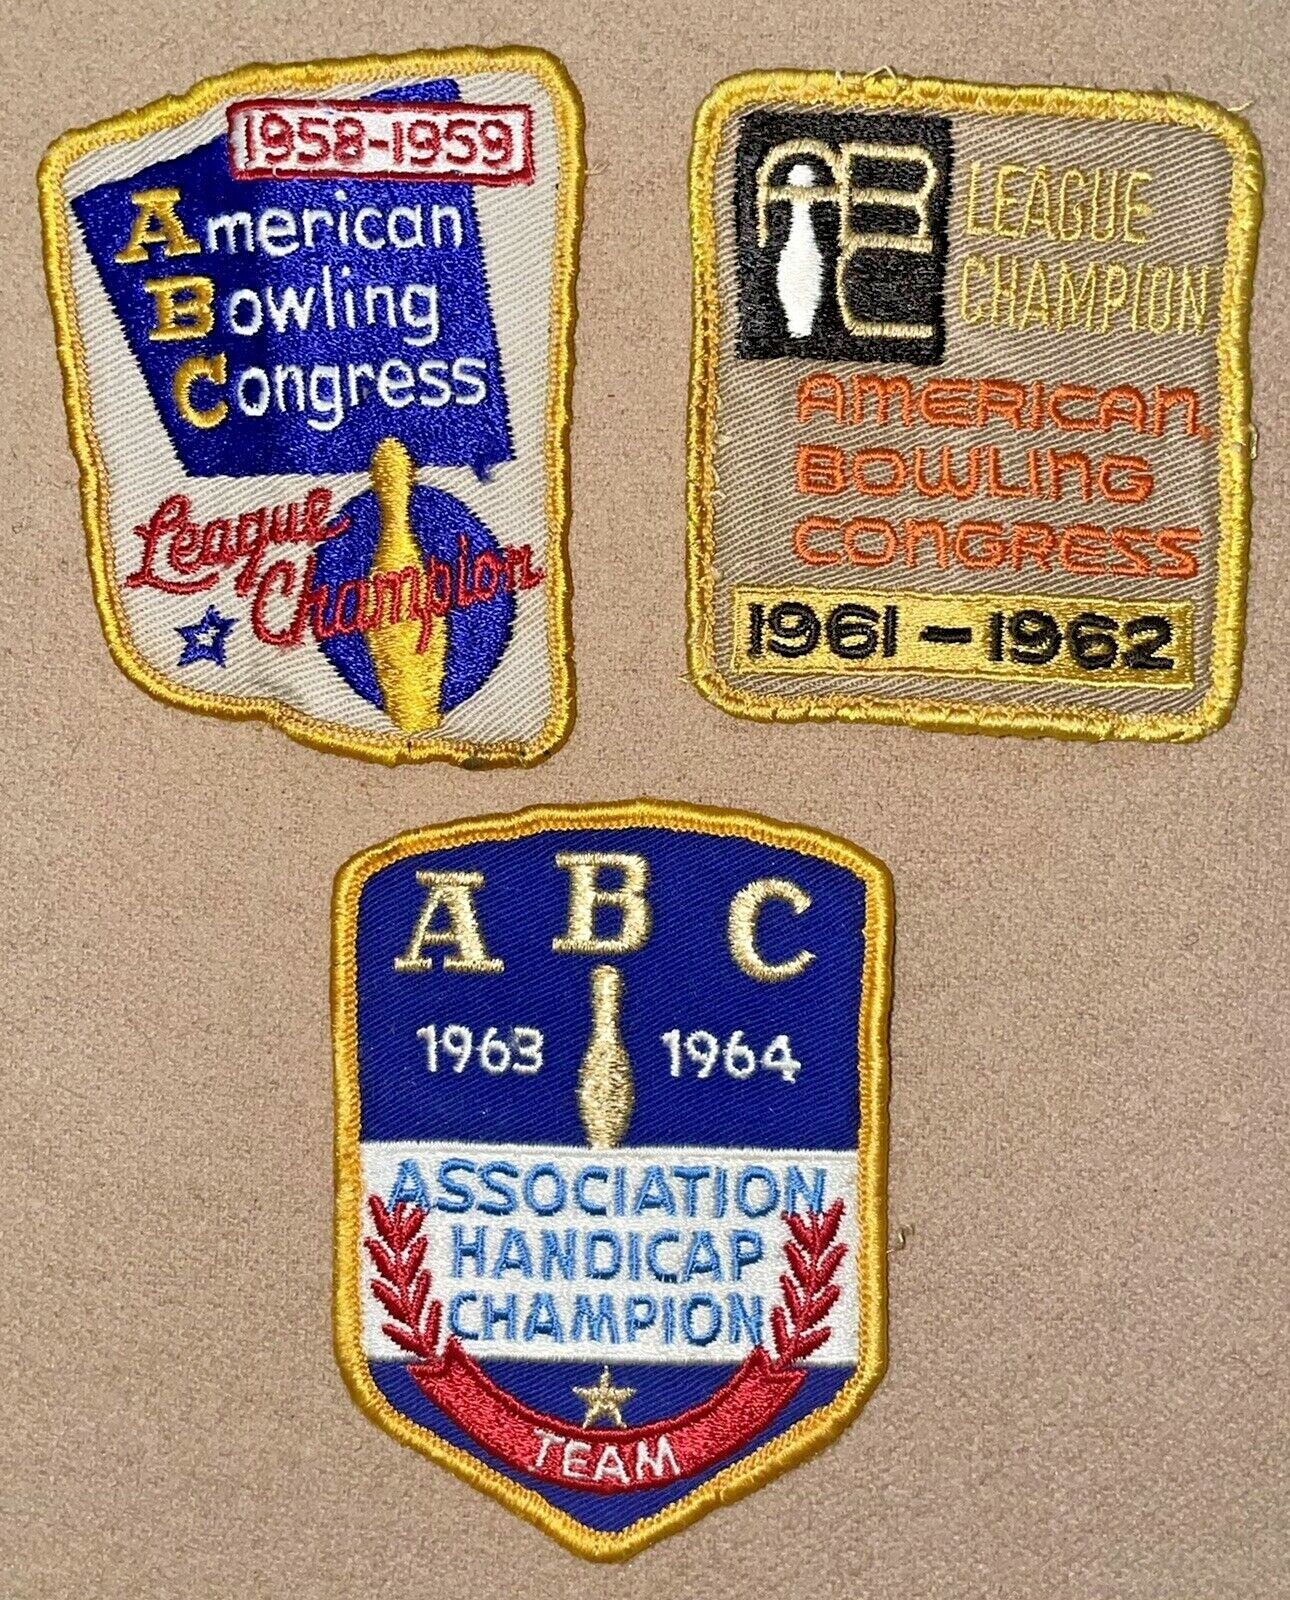 3 VINTAGE 1958 - 1964 BSA BOY SCOUTS AMERICAN BOWLING CONGRESS PATCH PATCHES